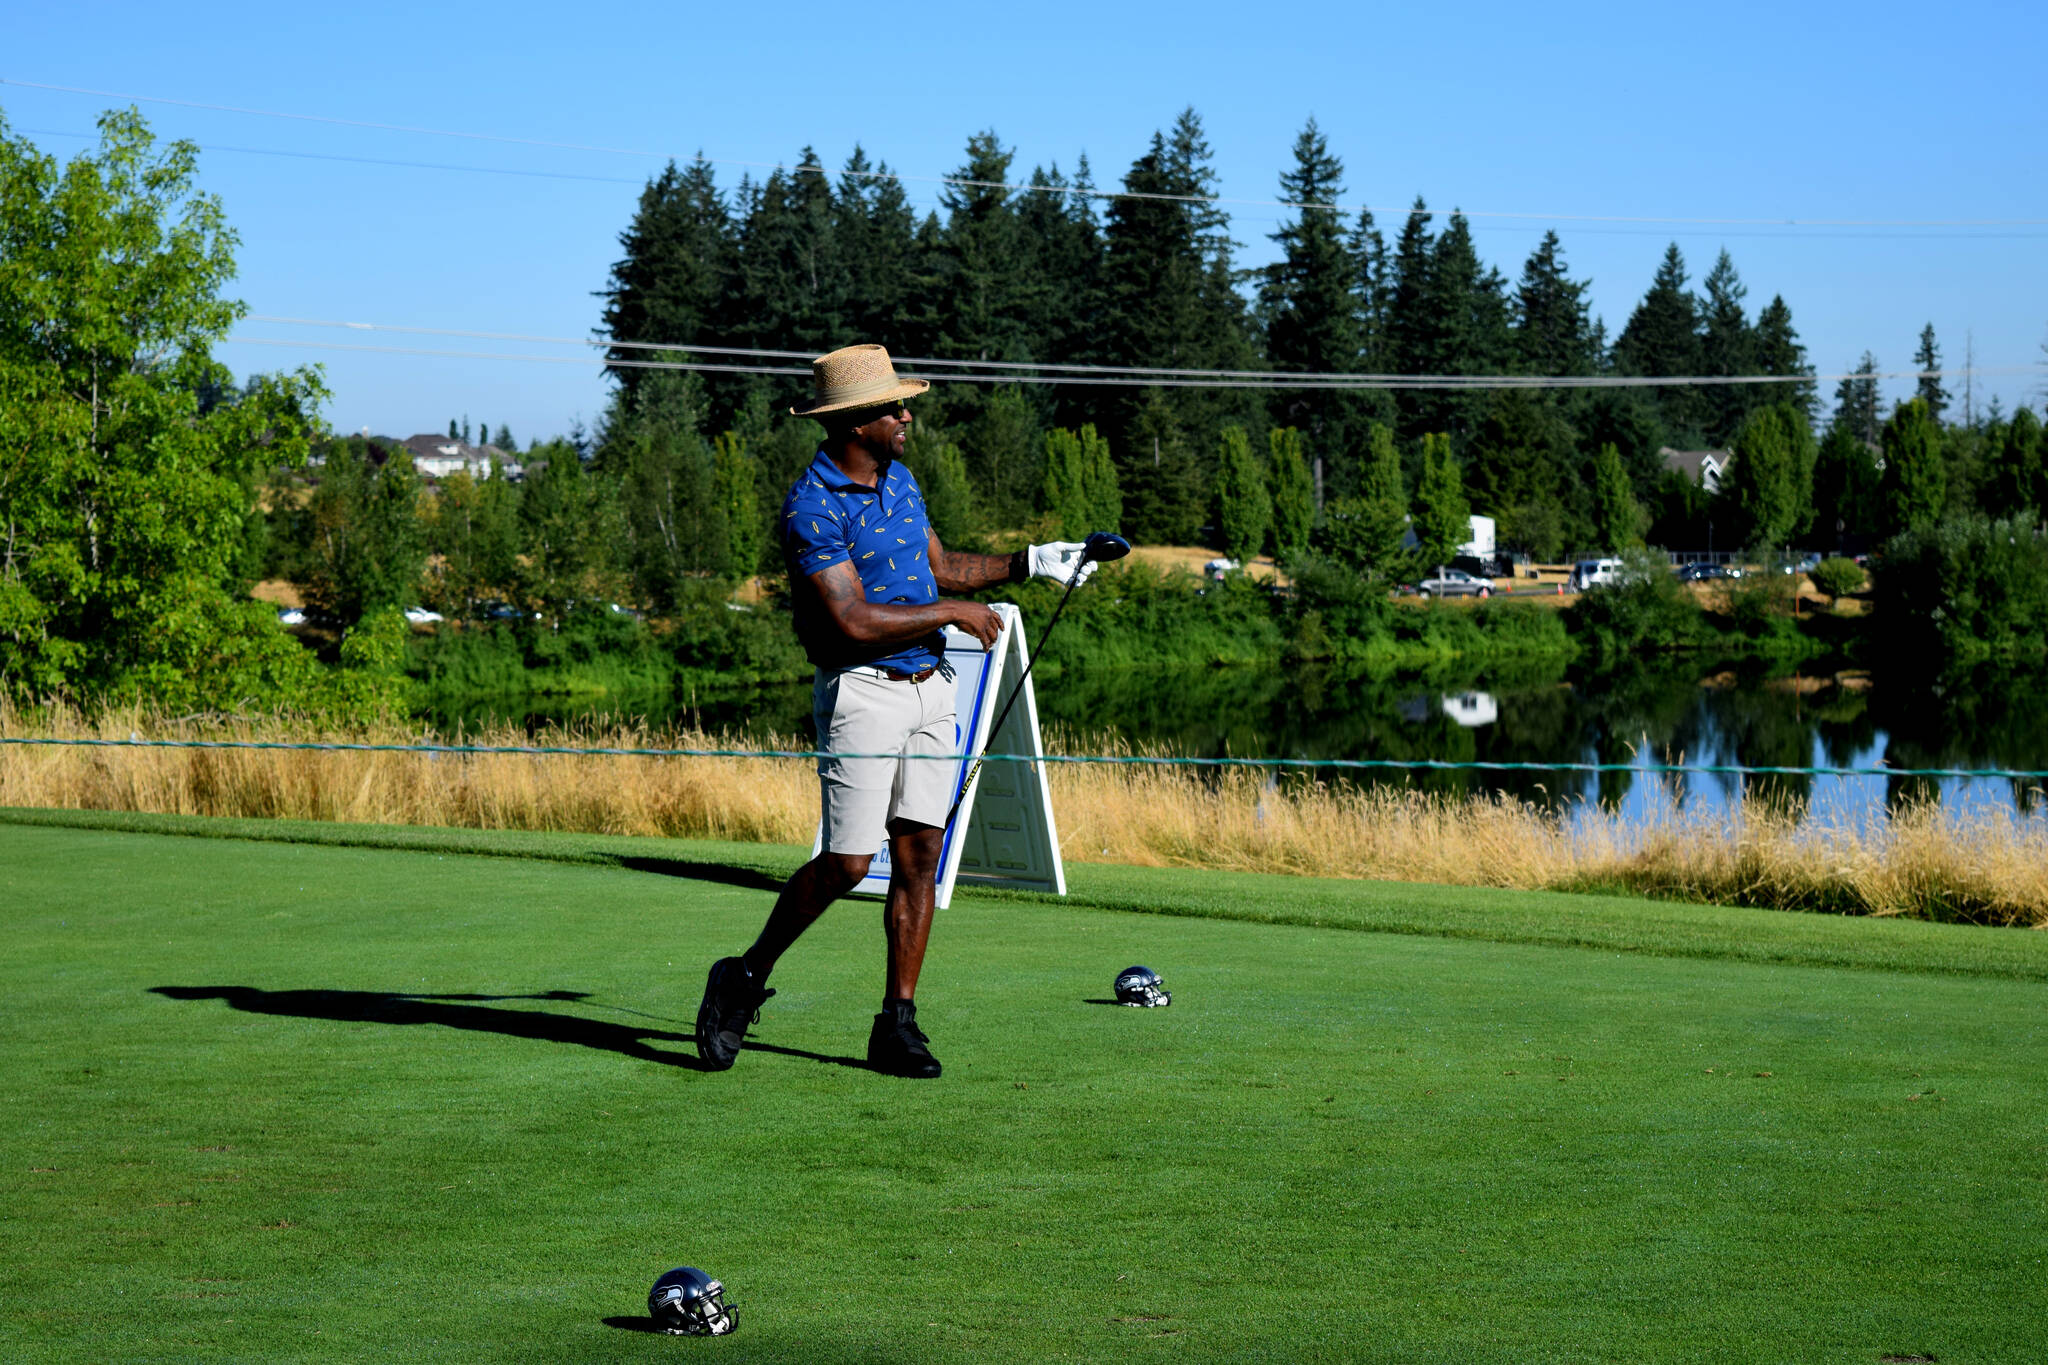 Former Seahawks safety Jordan Babineaux tees off on the tenth hole at the Seahawks Rumble at the The Ridge charity fundraiser on Aug. 8. Photo by Conor Wilson/Valley Record